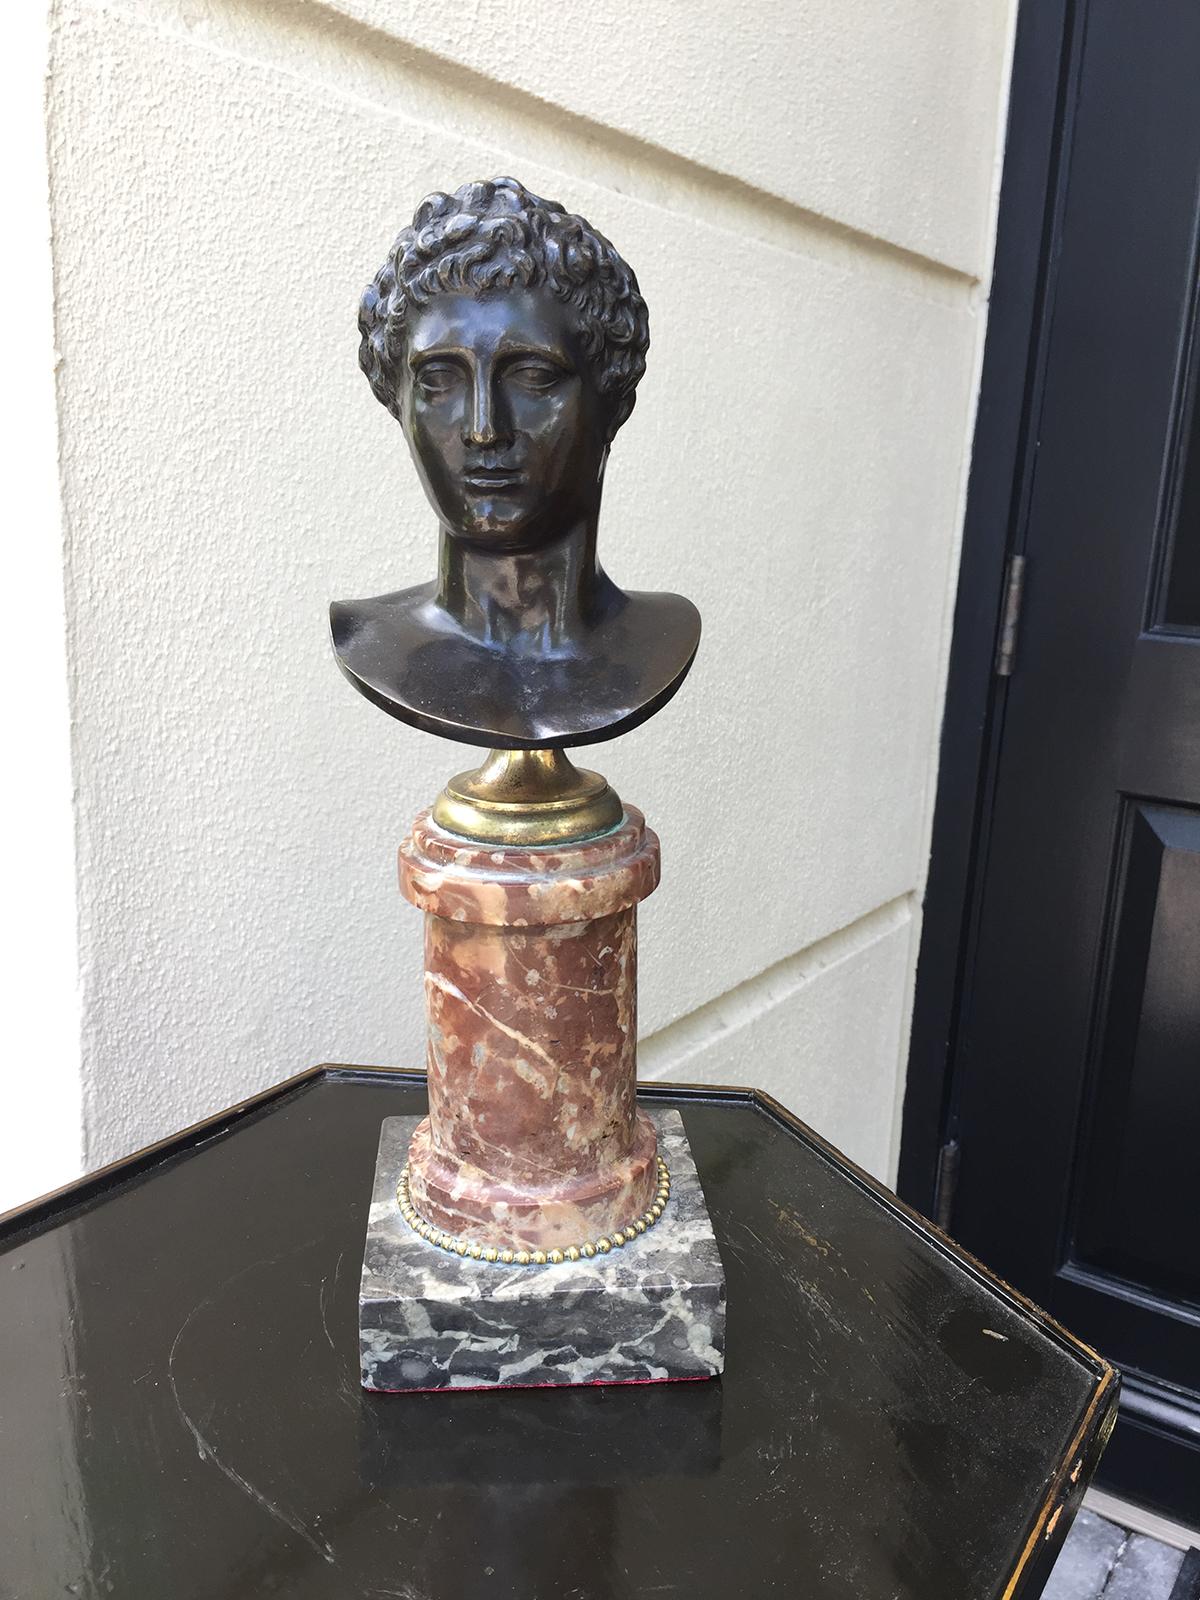 19th century bronze bust of Caesar on marble base.